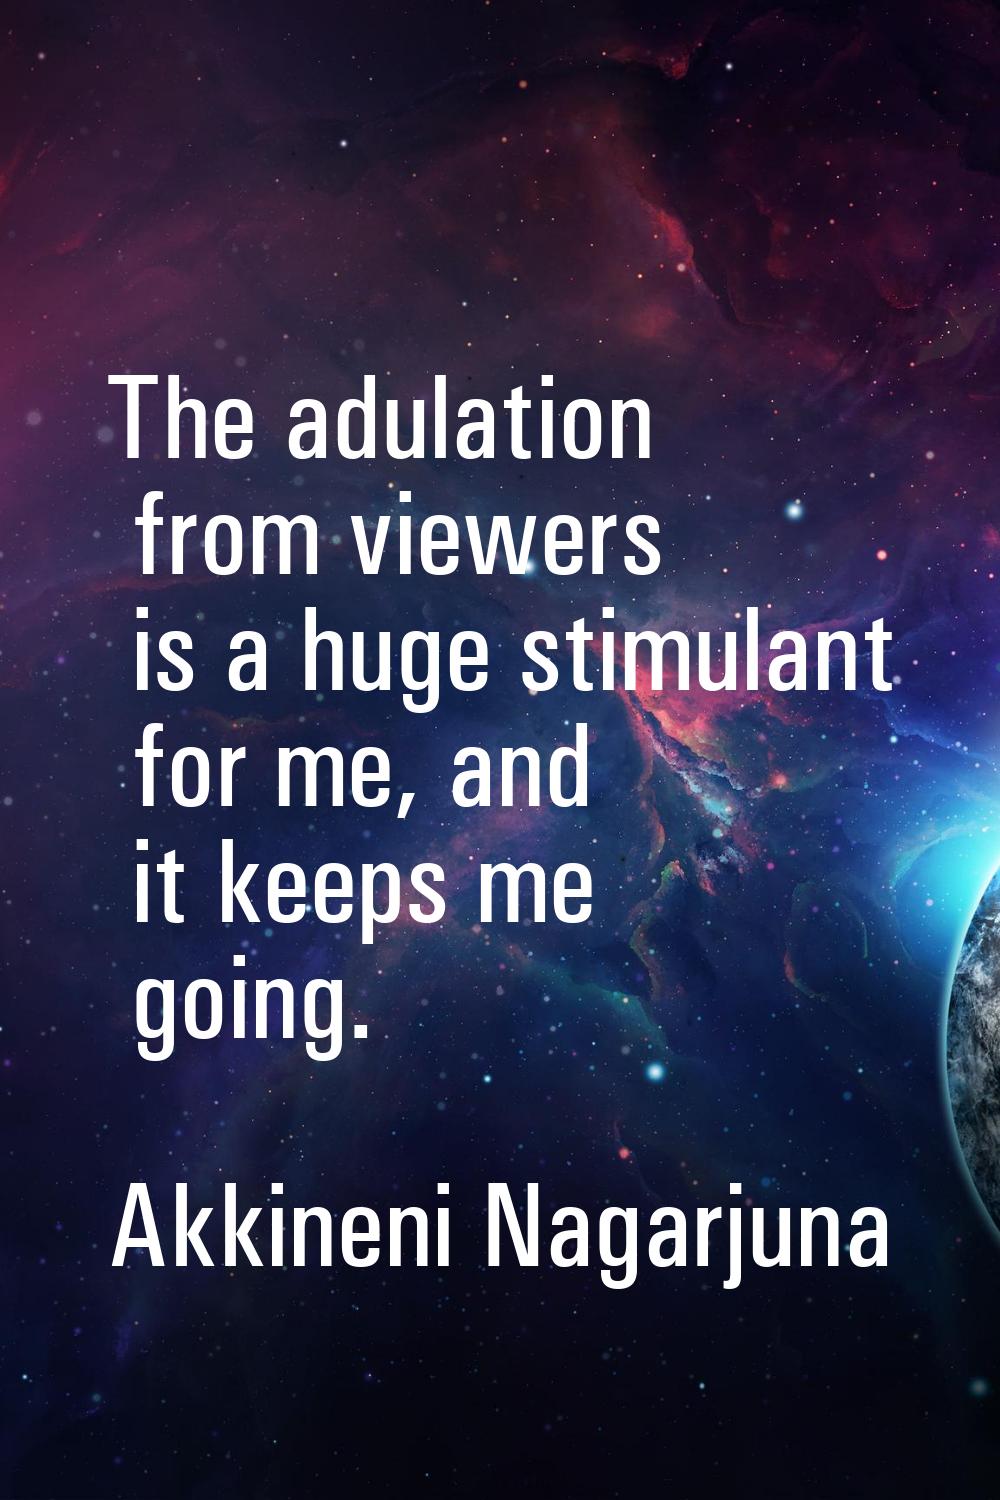 The adulation from viewers is a huge stimulant for me, and it keeps me going.